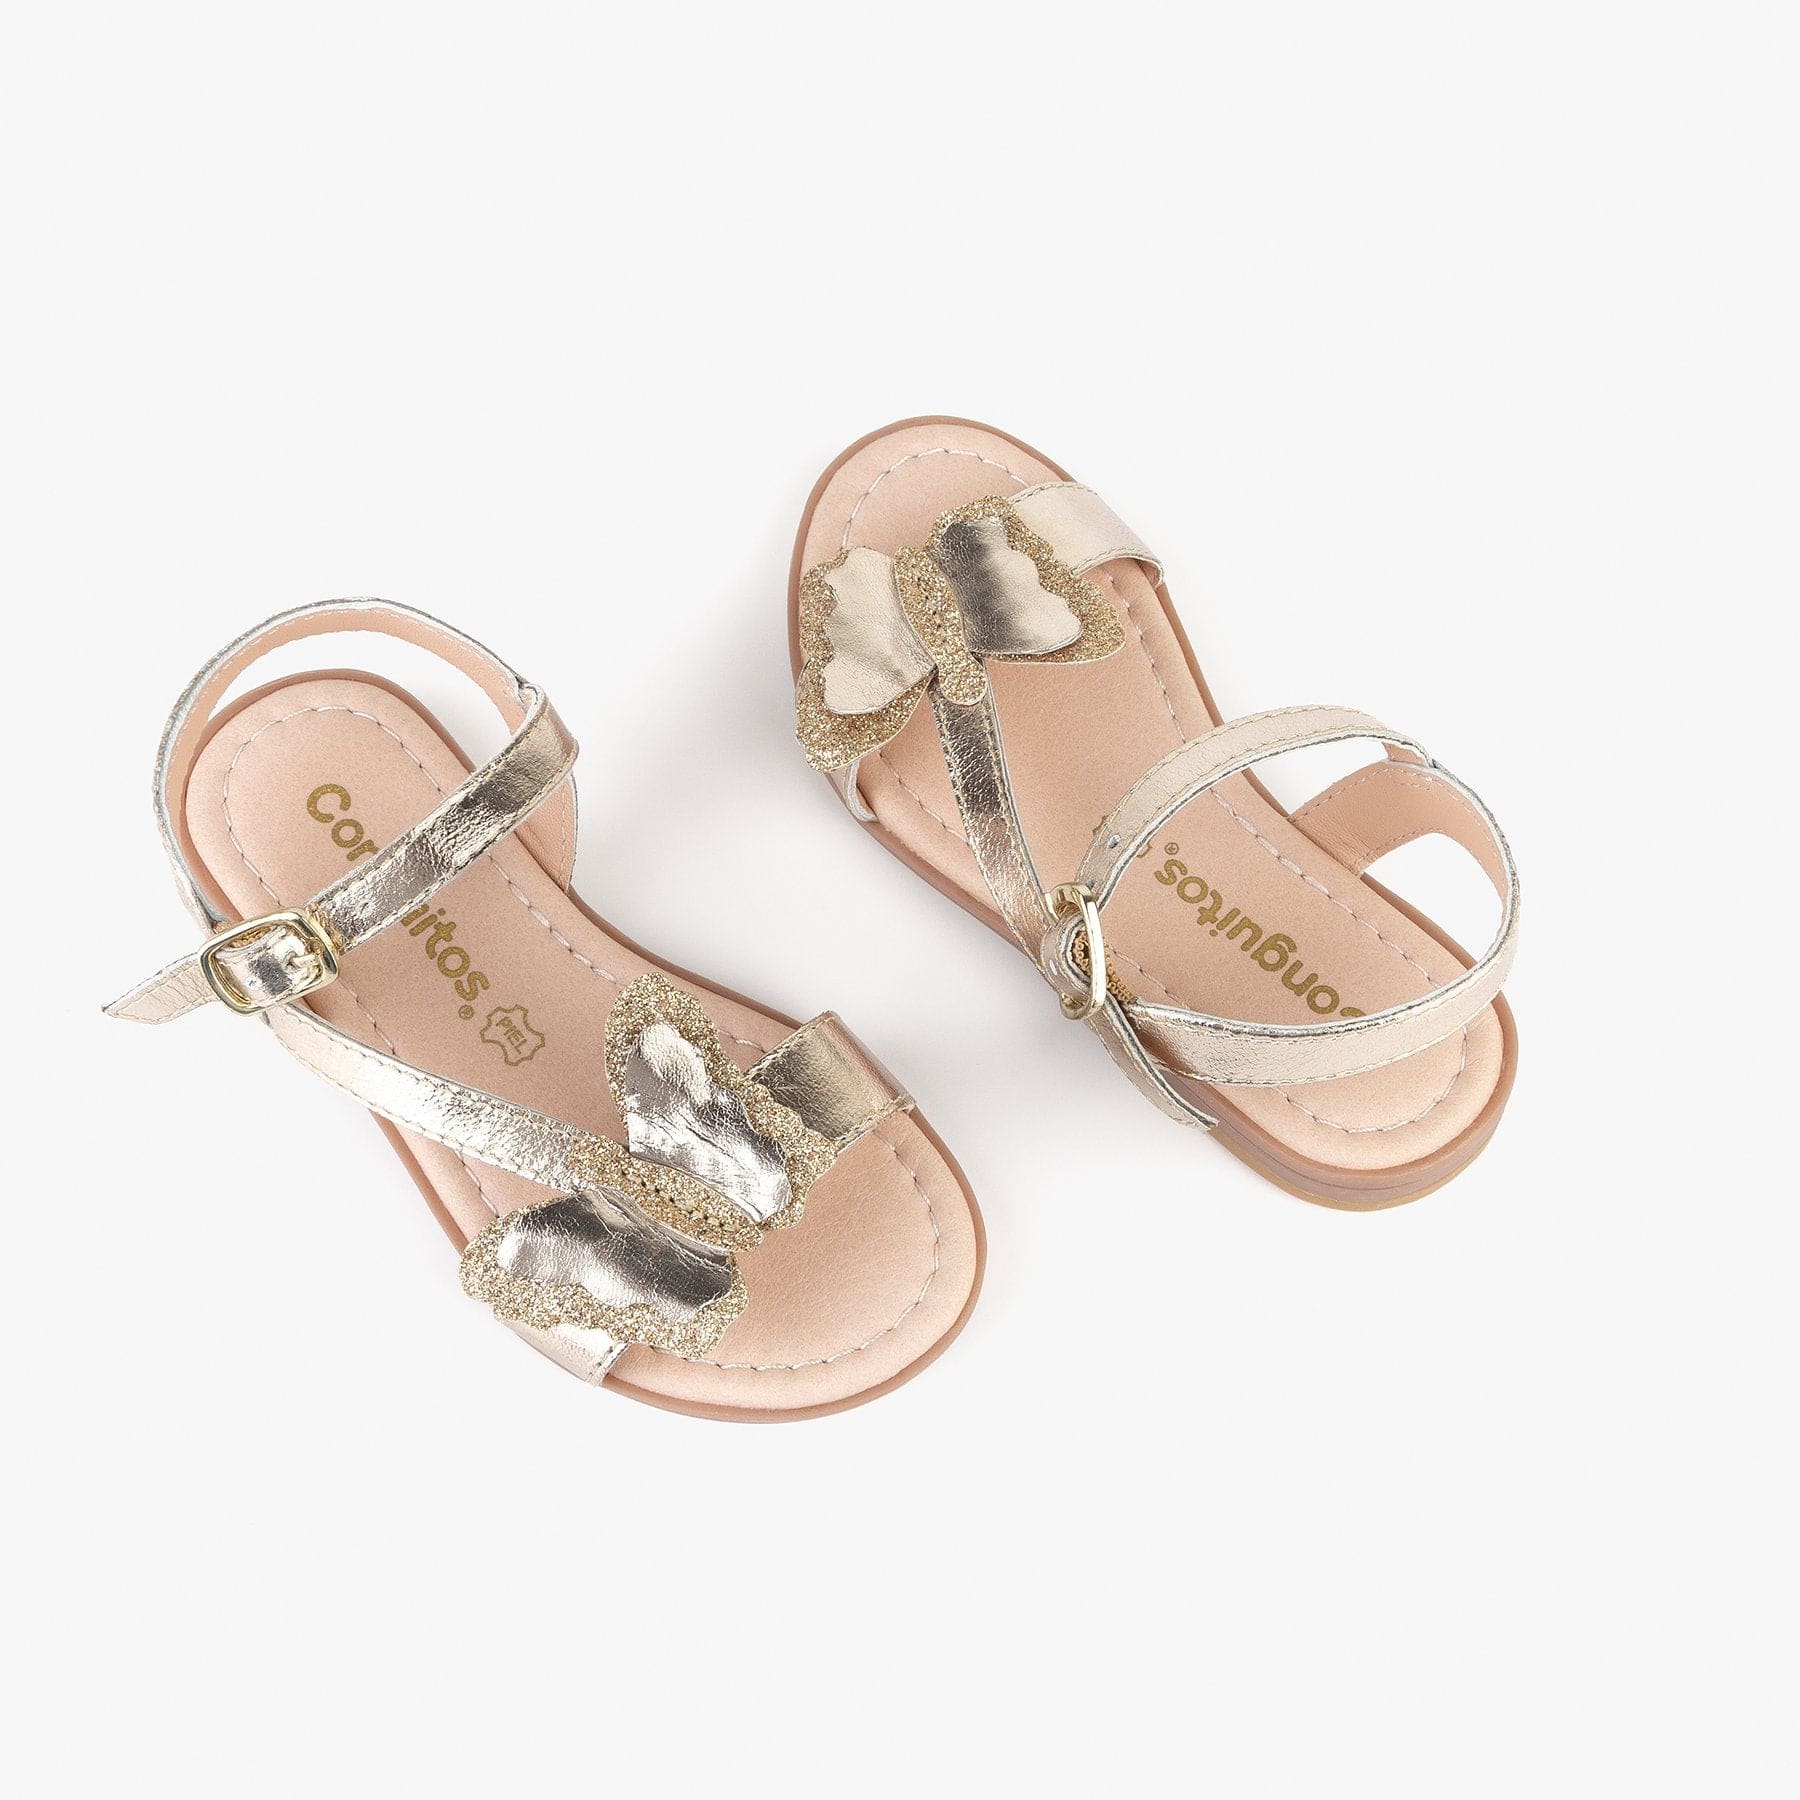 CONGUITOS Shoes Girl's "Butterfly" Platinum Leather Sandals